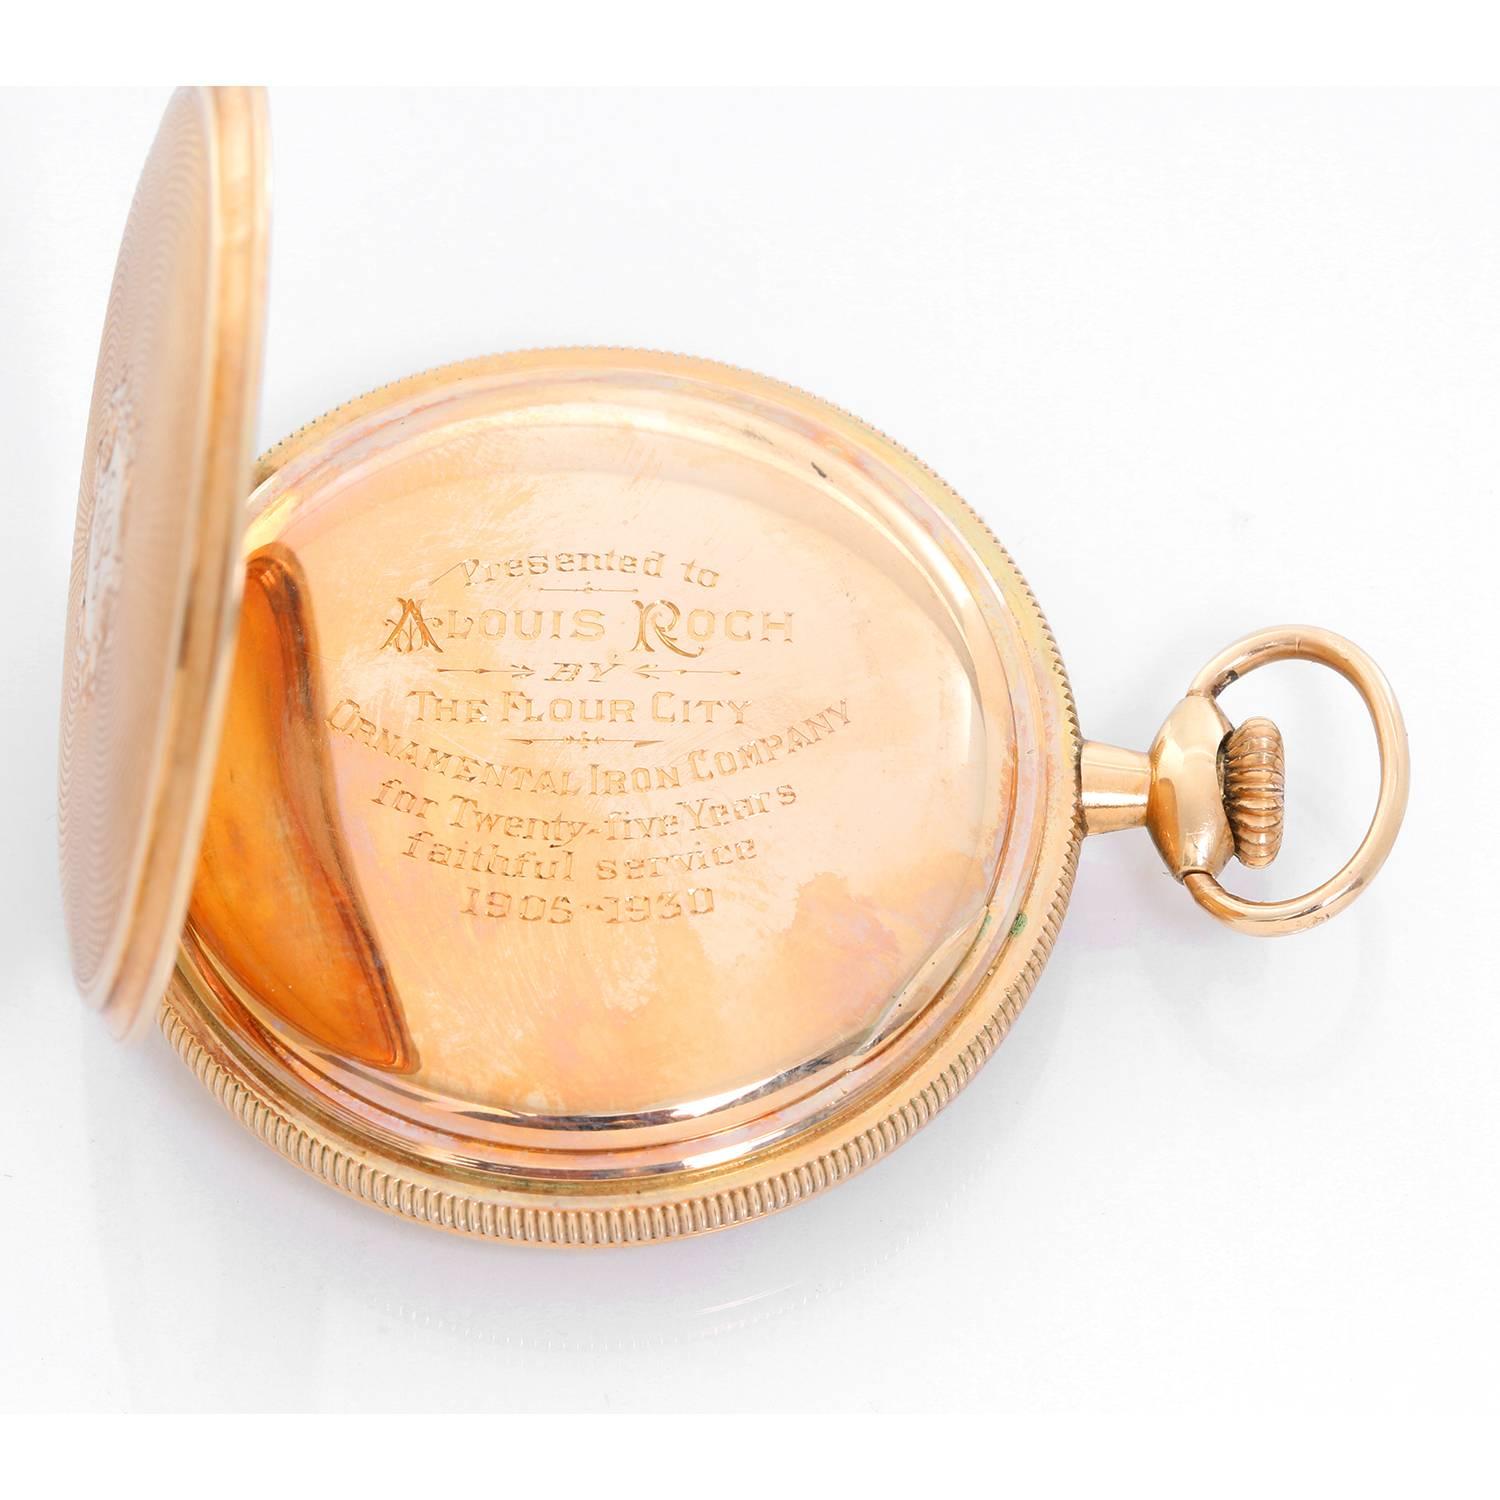 American Watch Co. Waltham 14K Yellow Gold Pocket Watch -  Manual winding; 17 jewels.  14K Yellow Gold solid case  with an engraved R in the caseback. Inside case engraved 